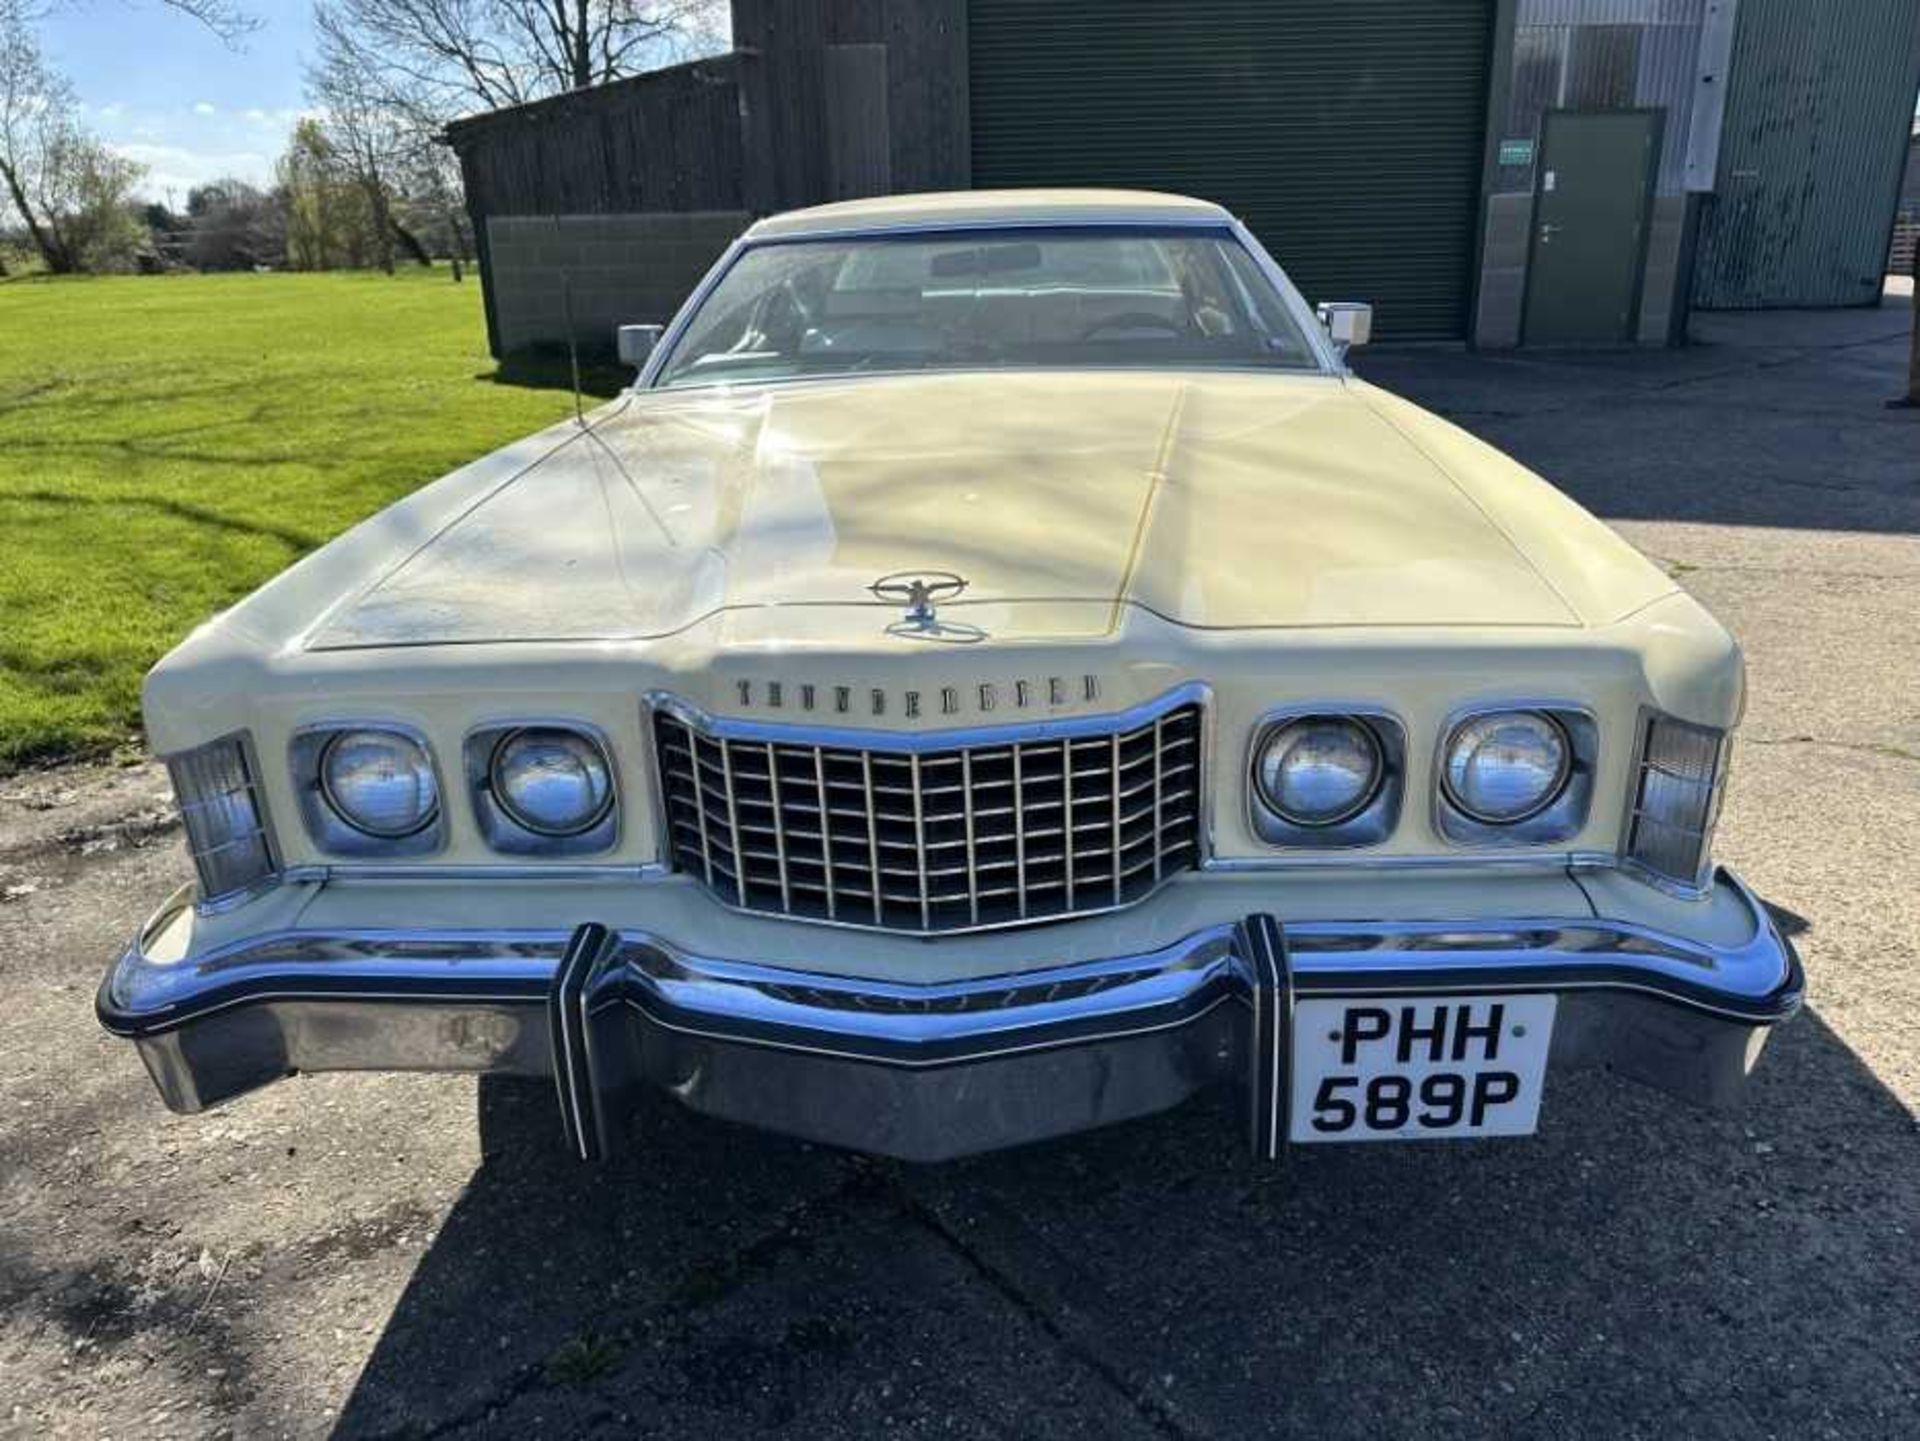 1976 Ford Thunderbird Coupe, Registration PHH 589P. This outrageous classic American grand tourer ha - Image 2 of 35